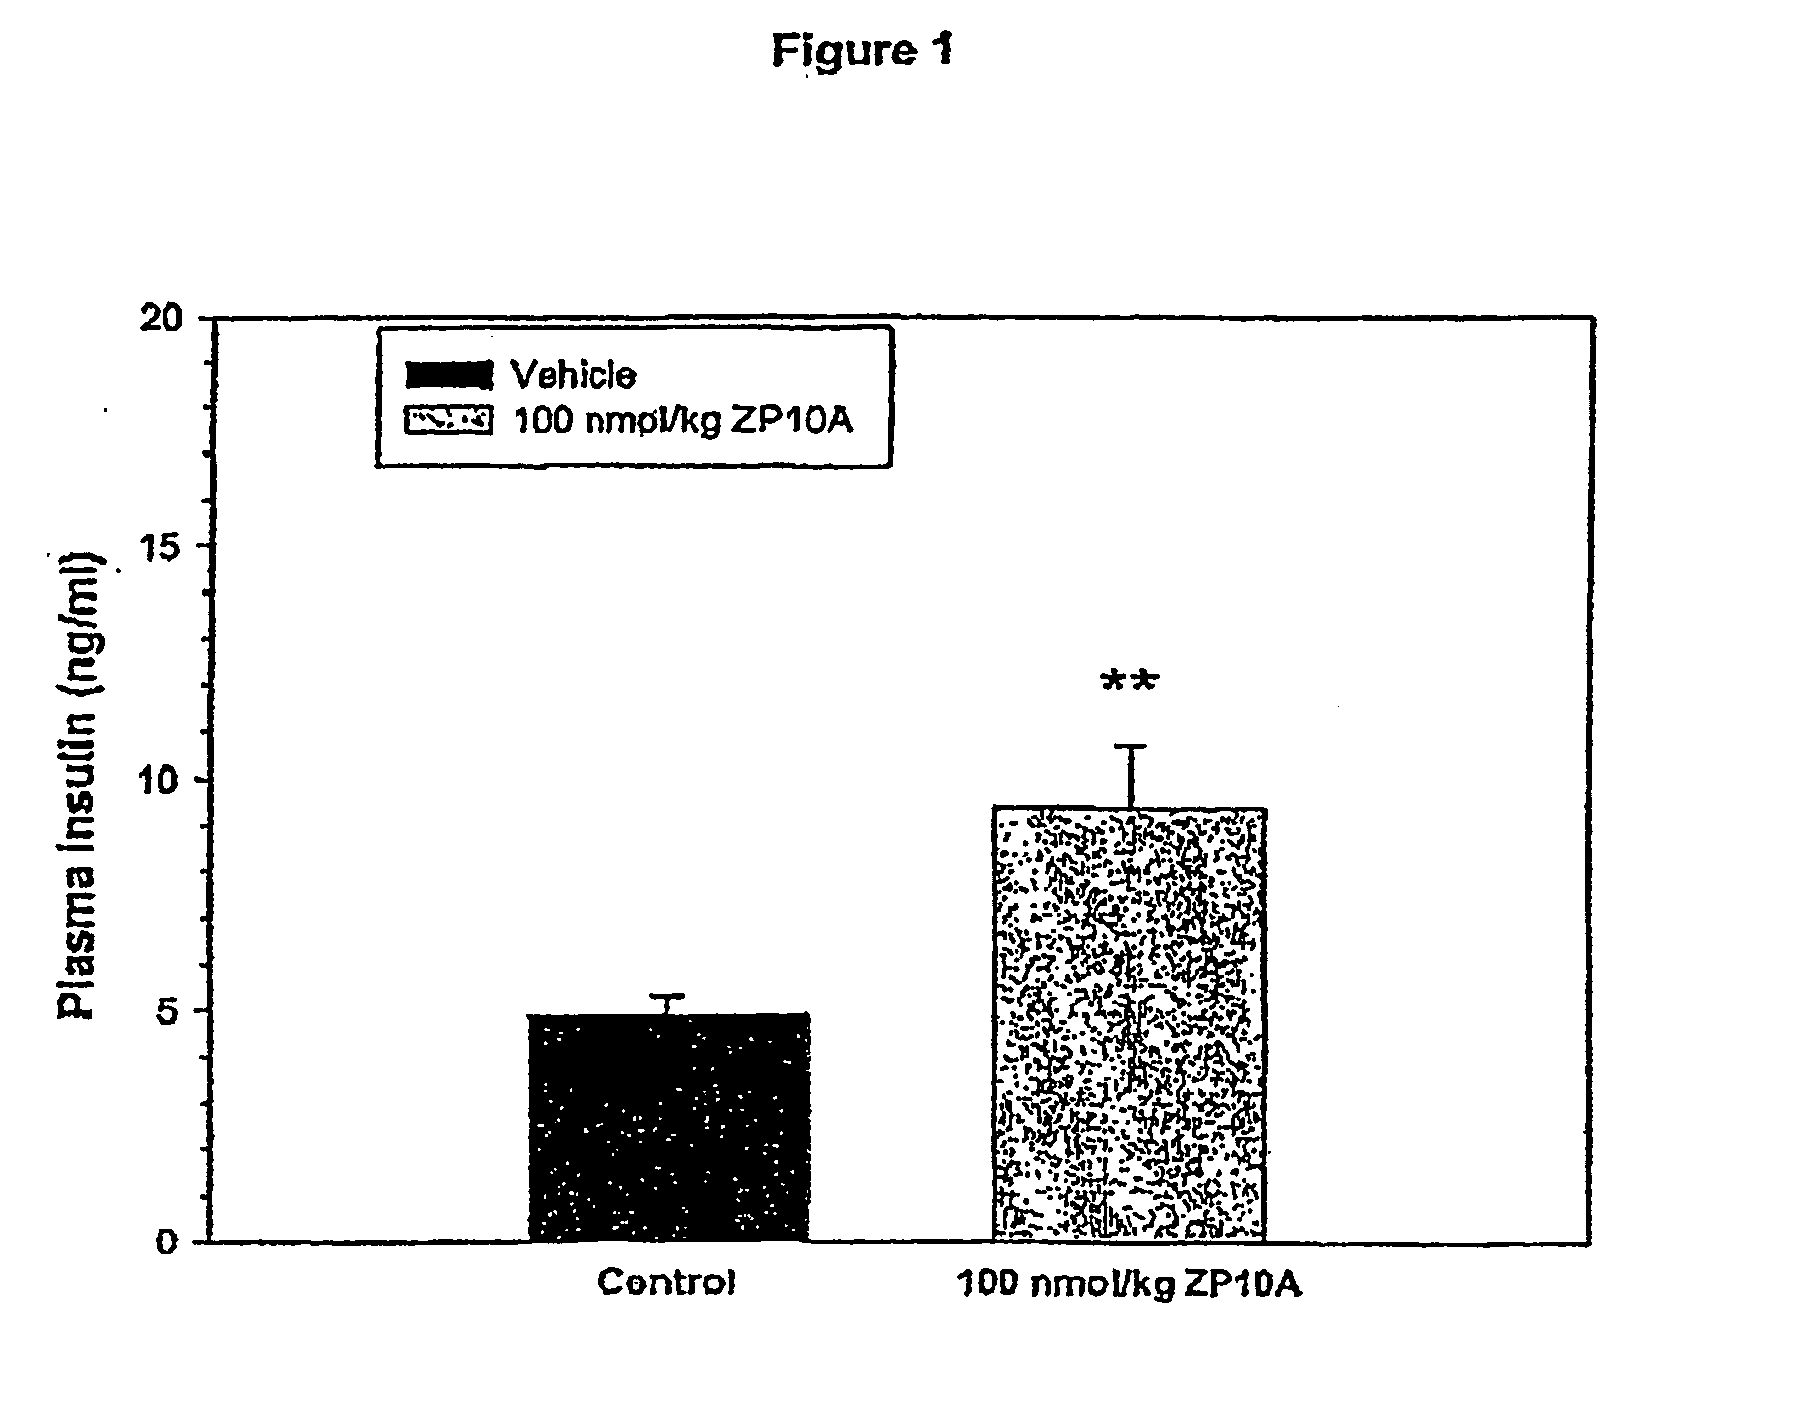 Glp-1 and methods for treating diabetes